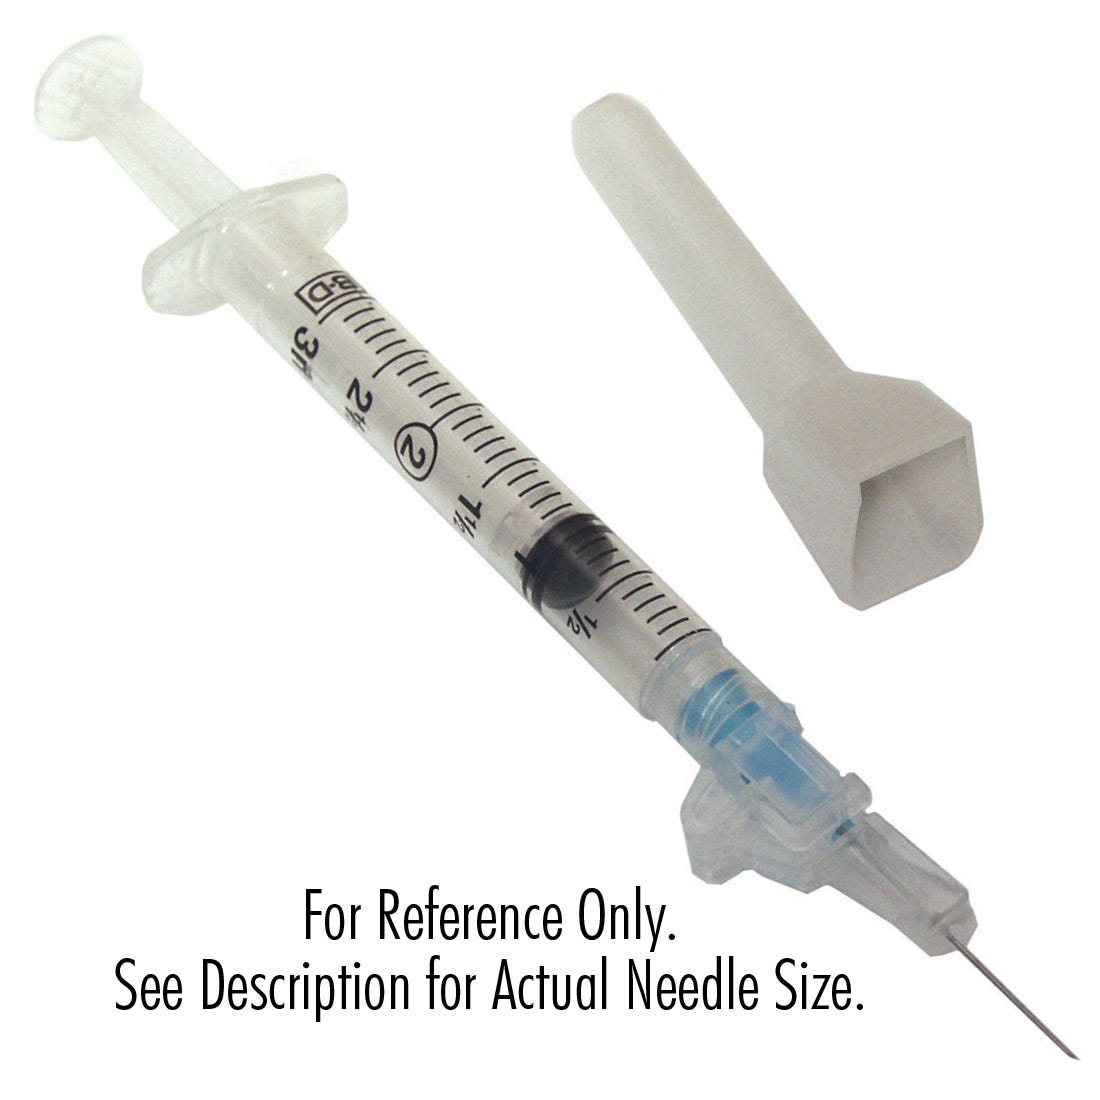 Becton-Dickinson 3cc Syringes - Latex Free-Shielding Subcutaneous Injection Needle 25G x 5/8"- 50/Box